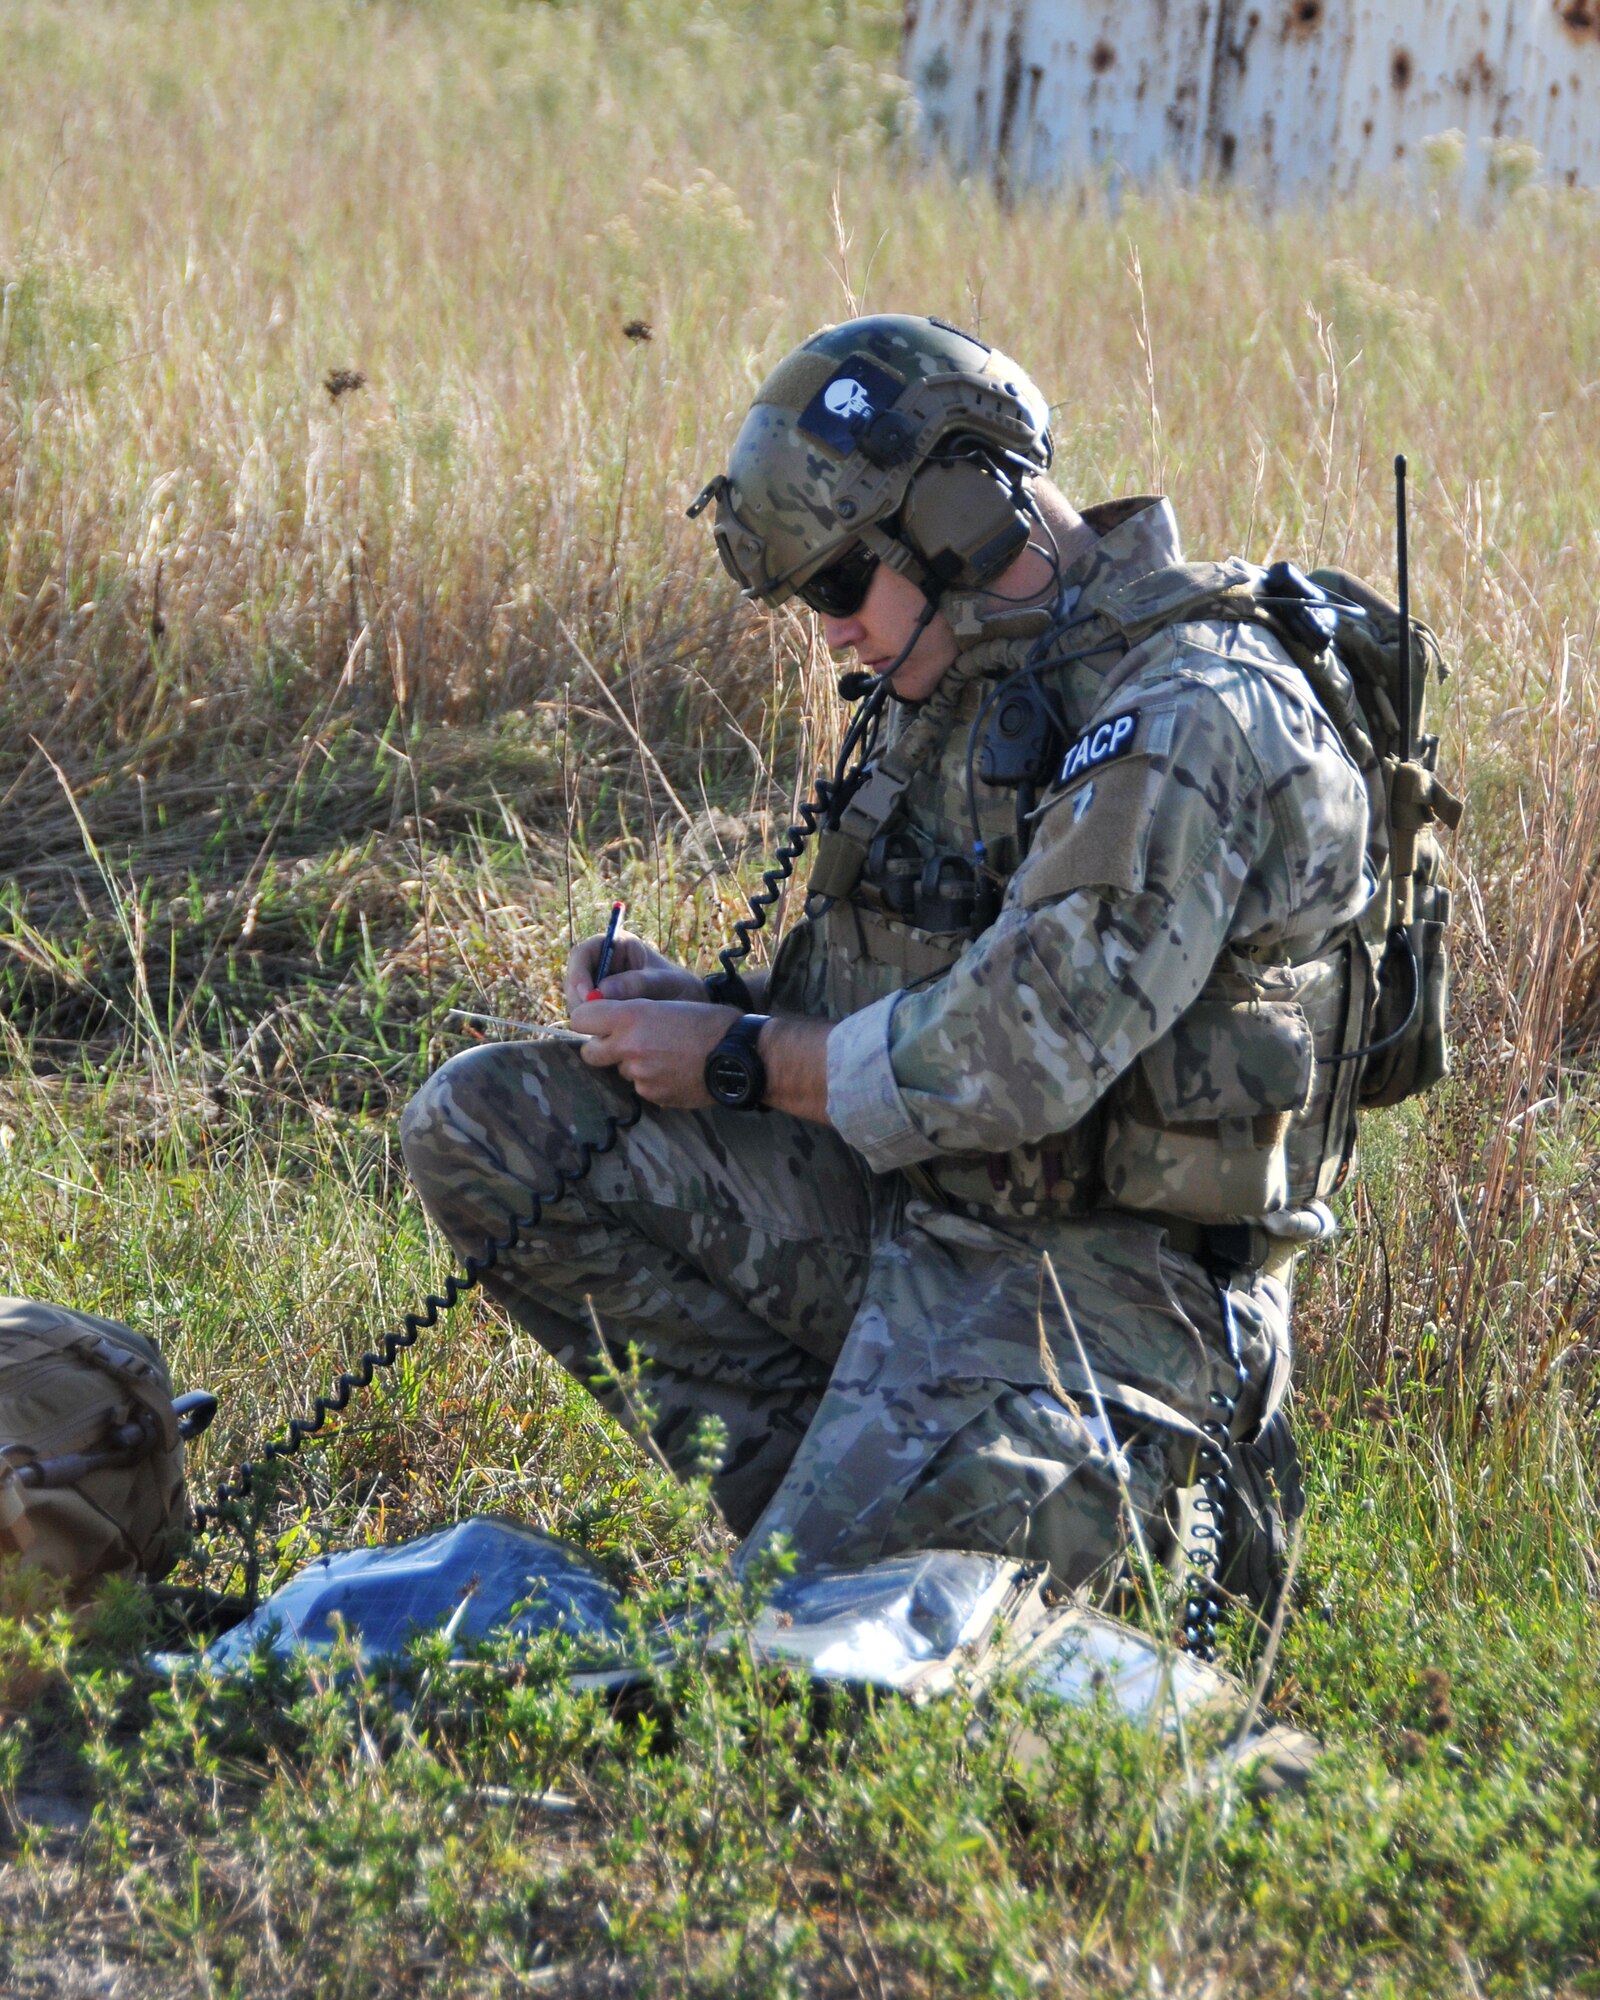 A member from the 147th Reconnaissance Wing Air Support Operations Squadron trains at Avon Park Air Force Range, Florida to complete required periodic evaluations December 16, 2013. Performing exercises at the Florida range allows the airmen to hone the necessary skill sets to perform their jobs and missions in an environment that allows for the use of live fighter aircraft and live munitions to replicate real-life war fighting scenarios.